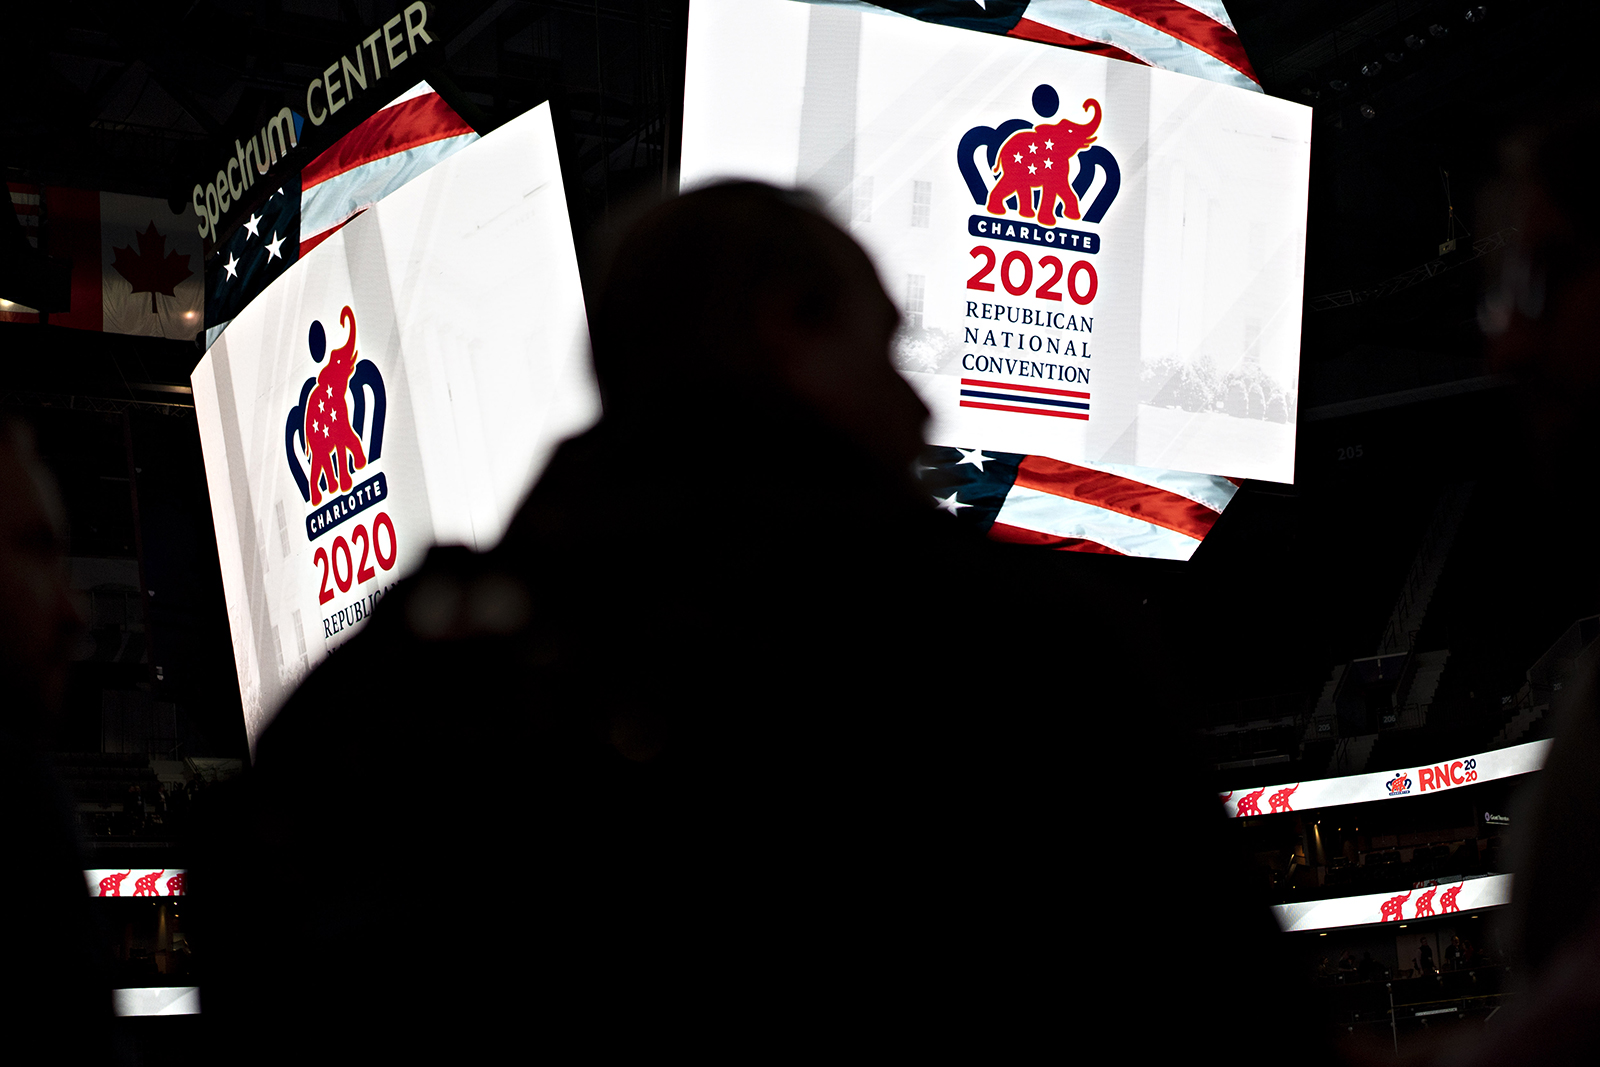 2020 Republican National Convention (RNC) signage is displayed inside the Spectrum Center during a media walk-through in Charlotte, North Carolina on November 12, 2019.